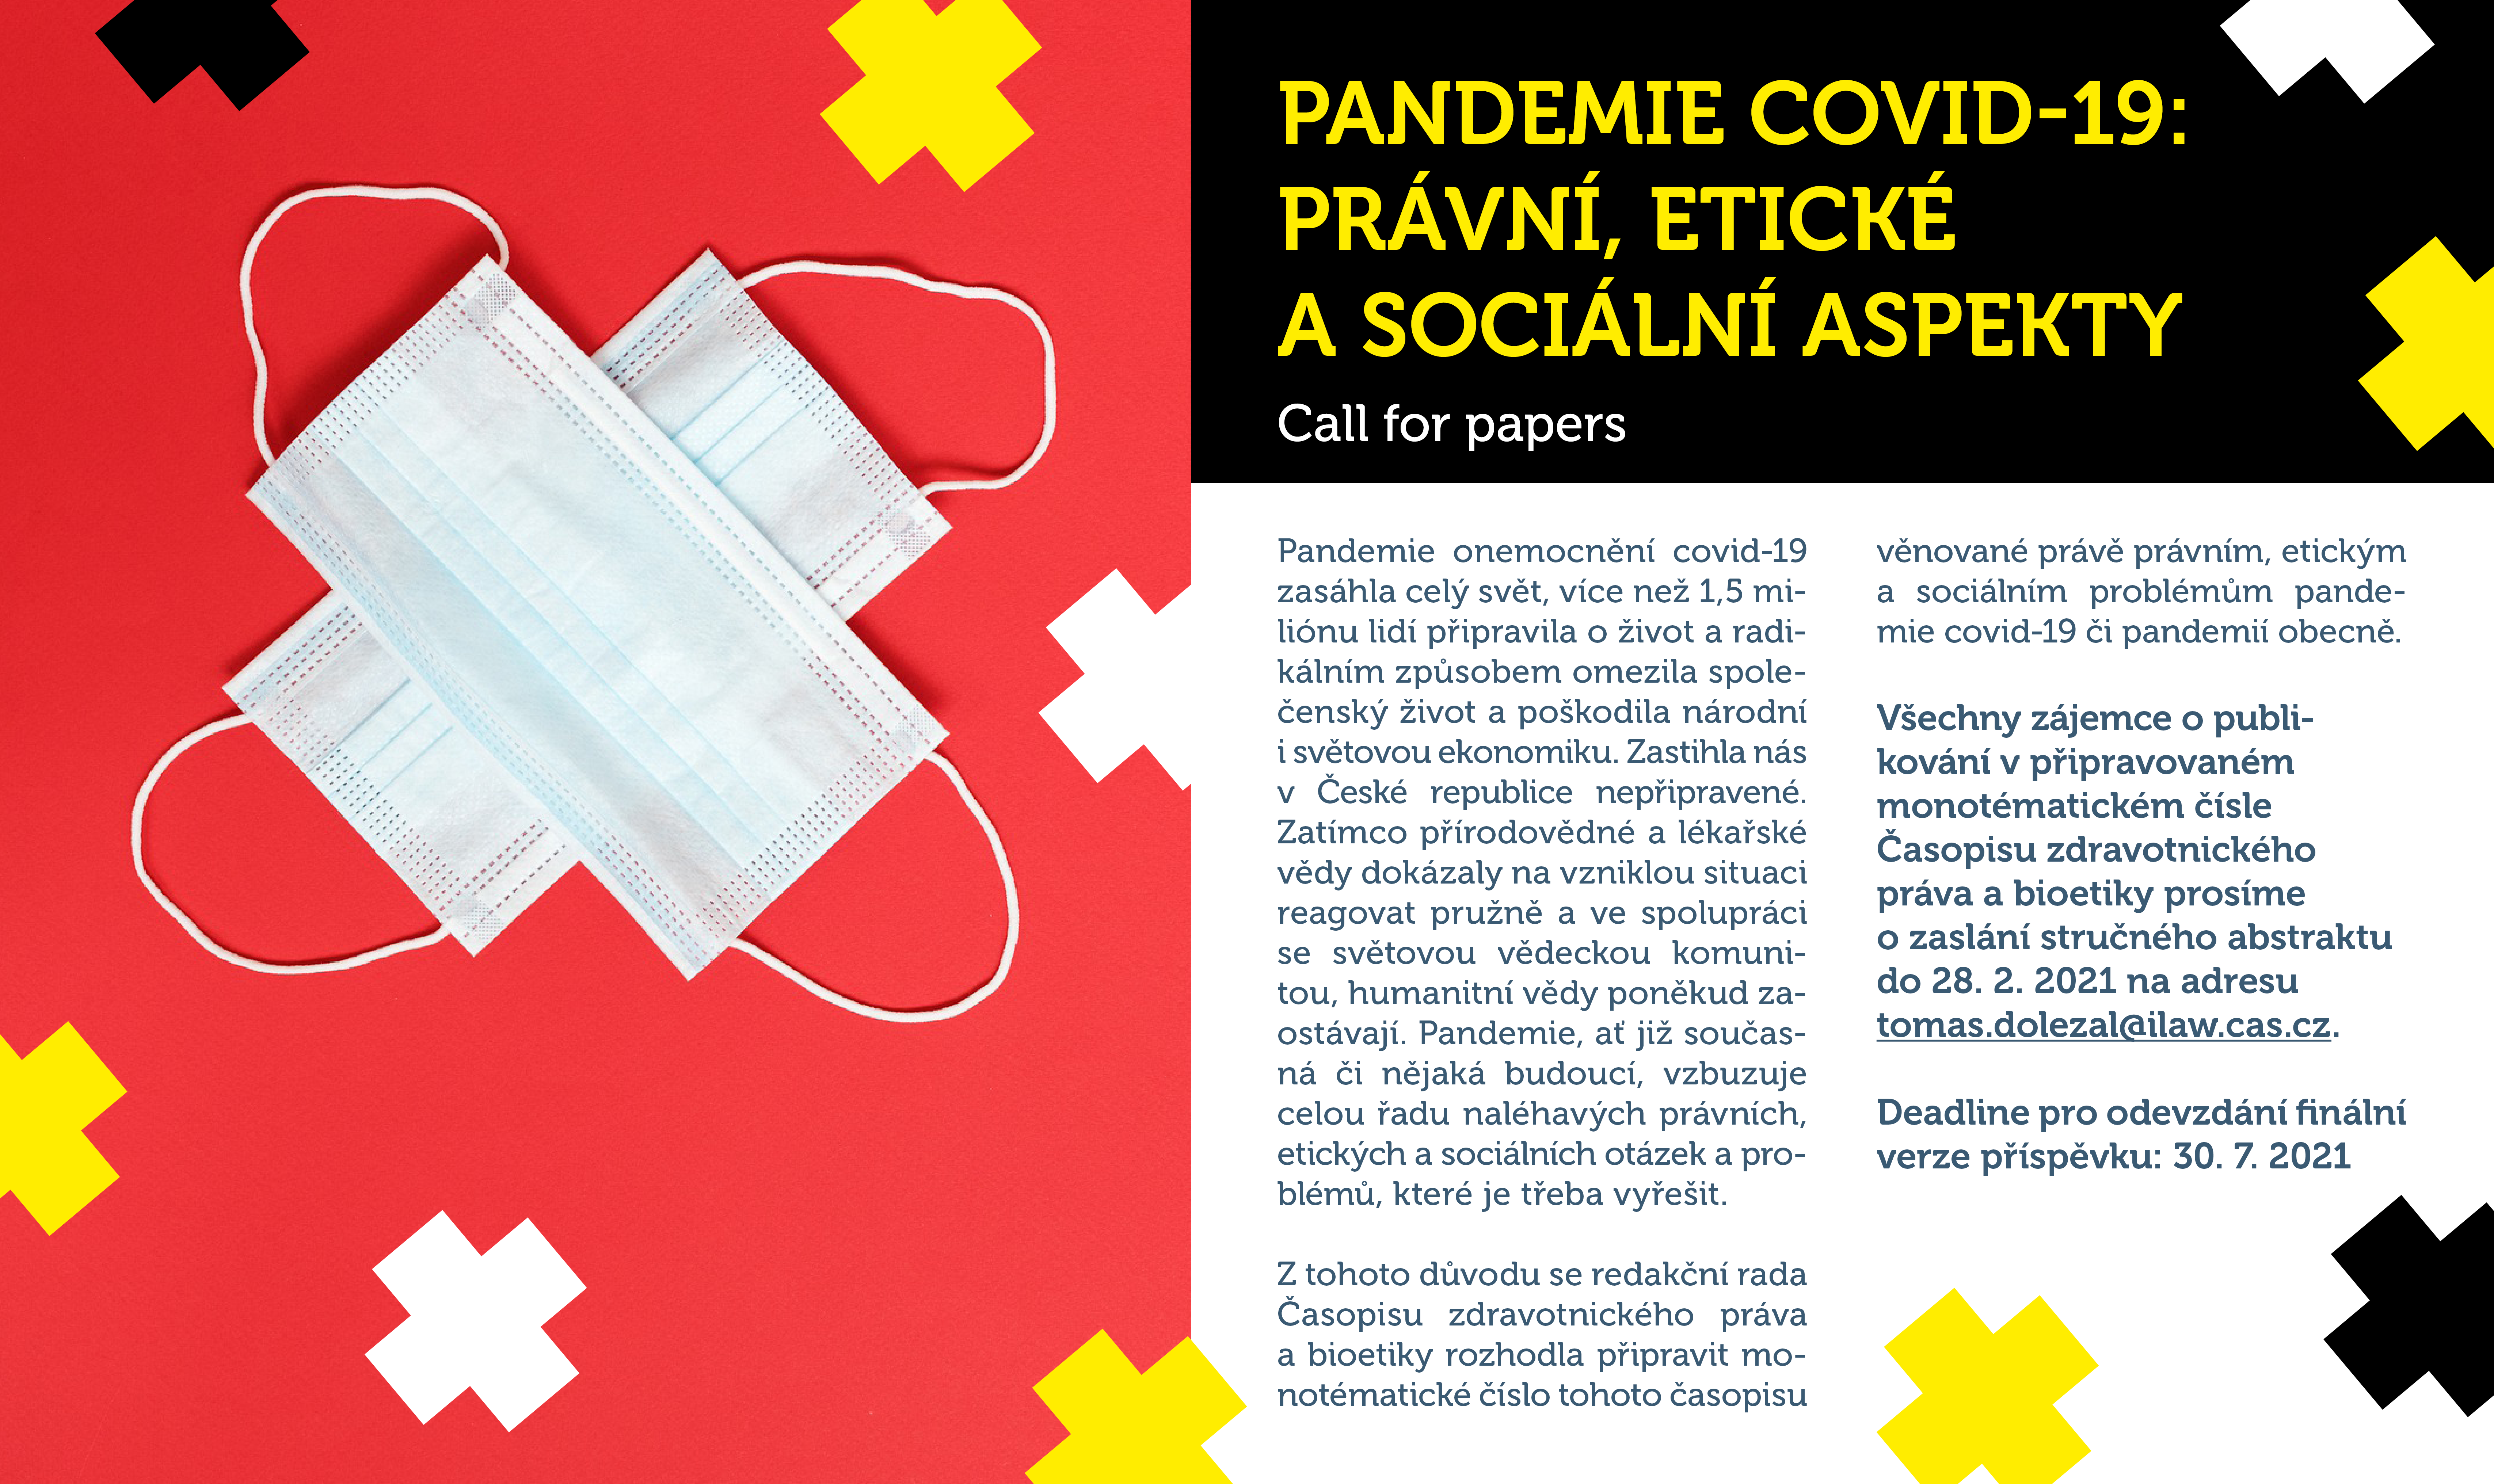 Covid-19 Pandemic: Legal, Ethical and Social Aspects